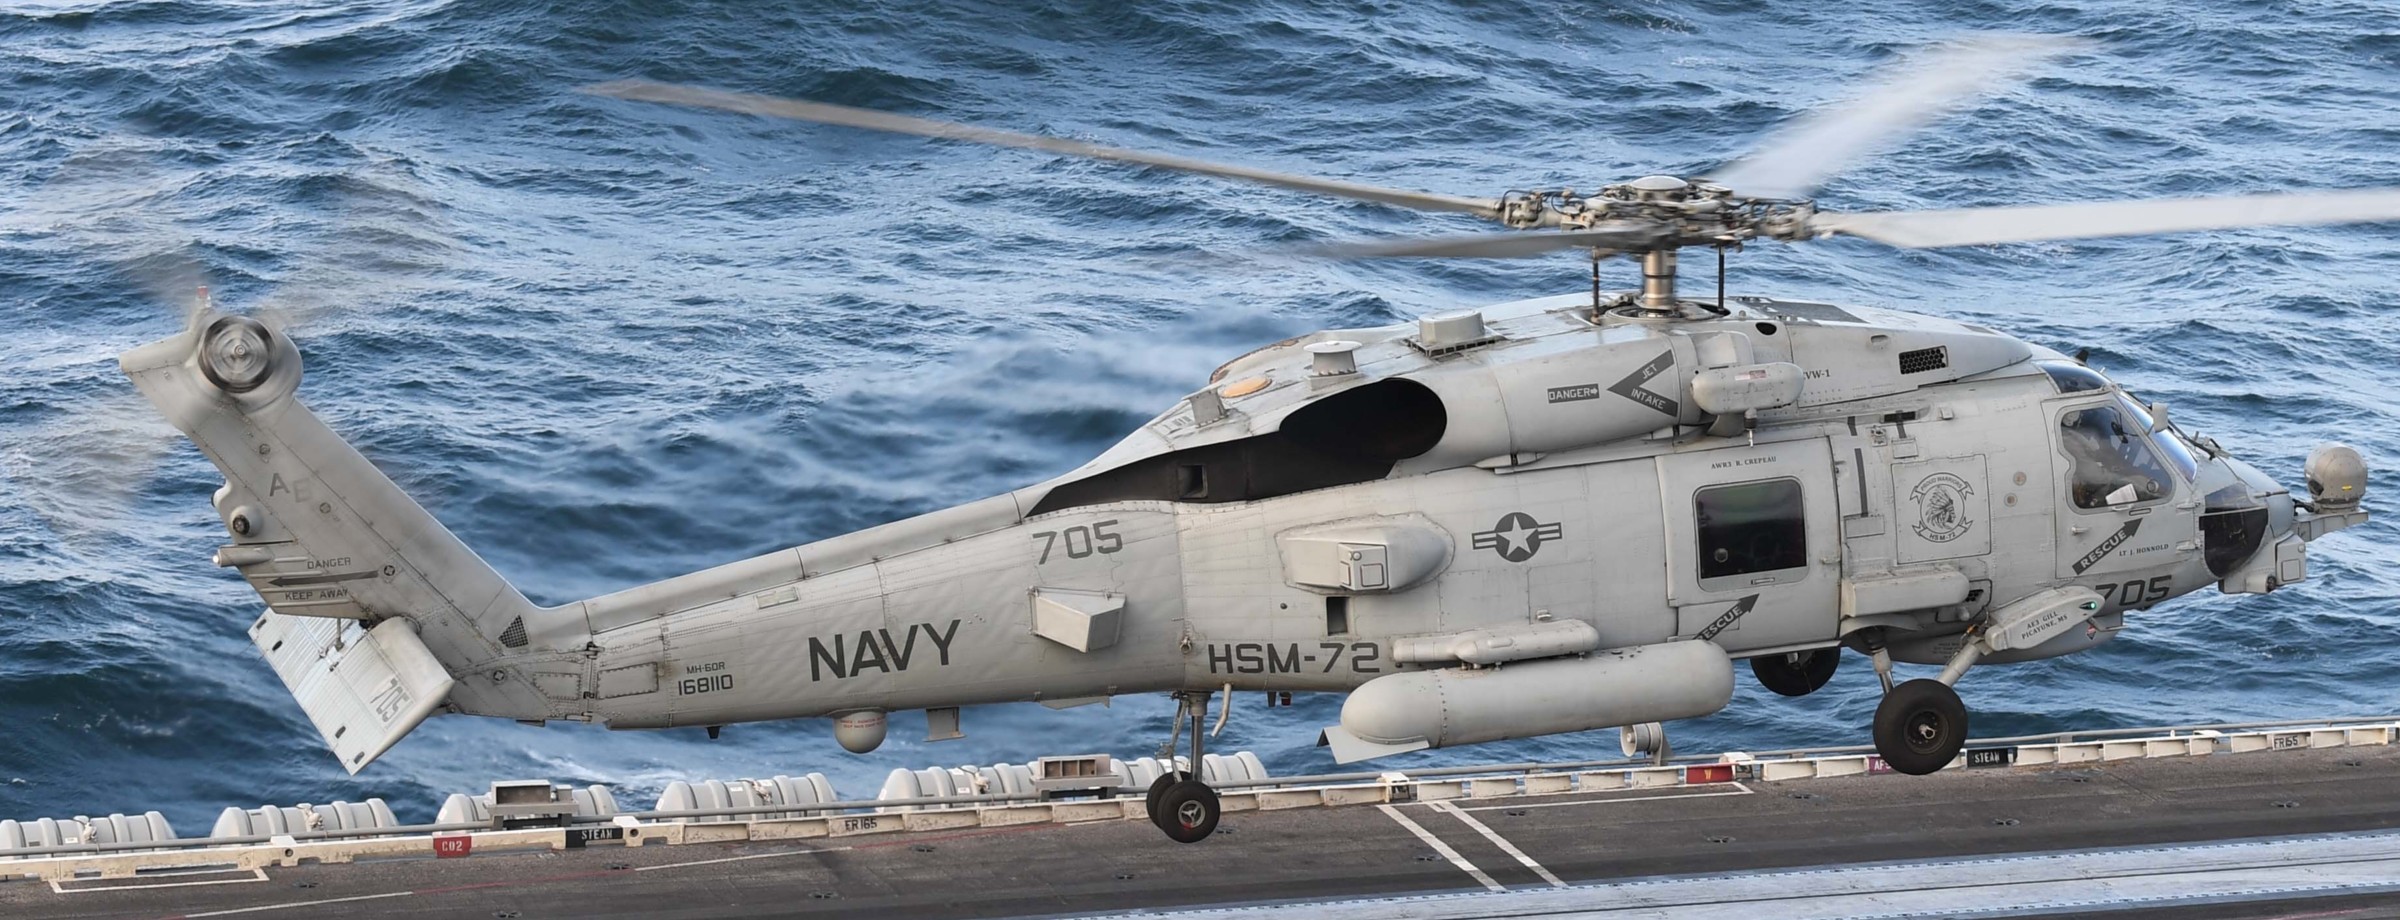 hsm-72 proud warriors helicopter maritime strike squadron us navy mh-60r seahawk 2014 36